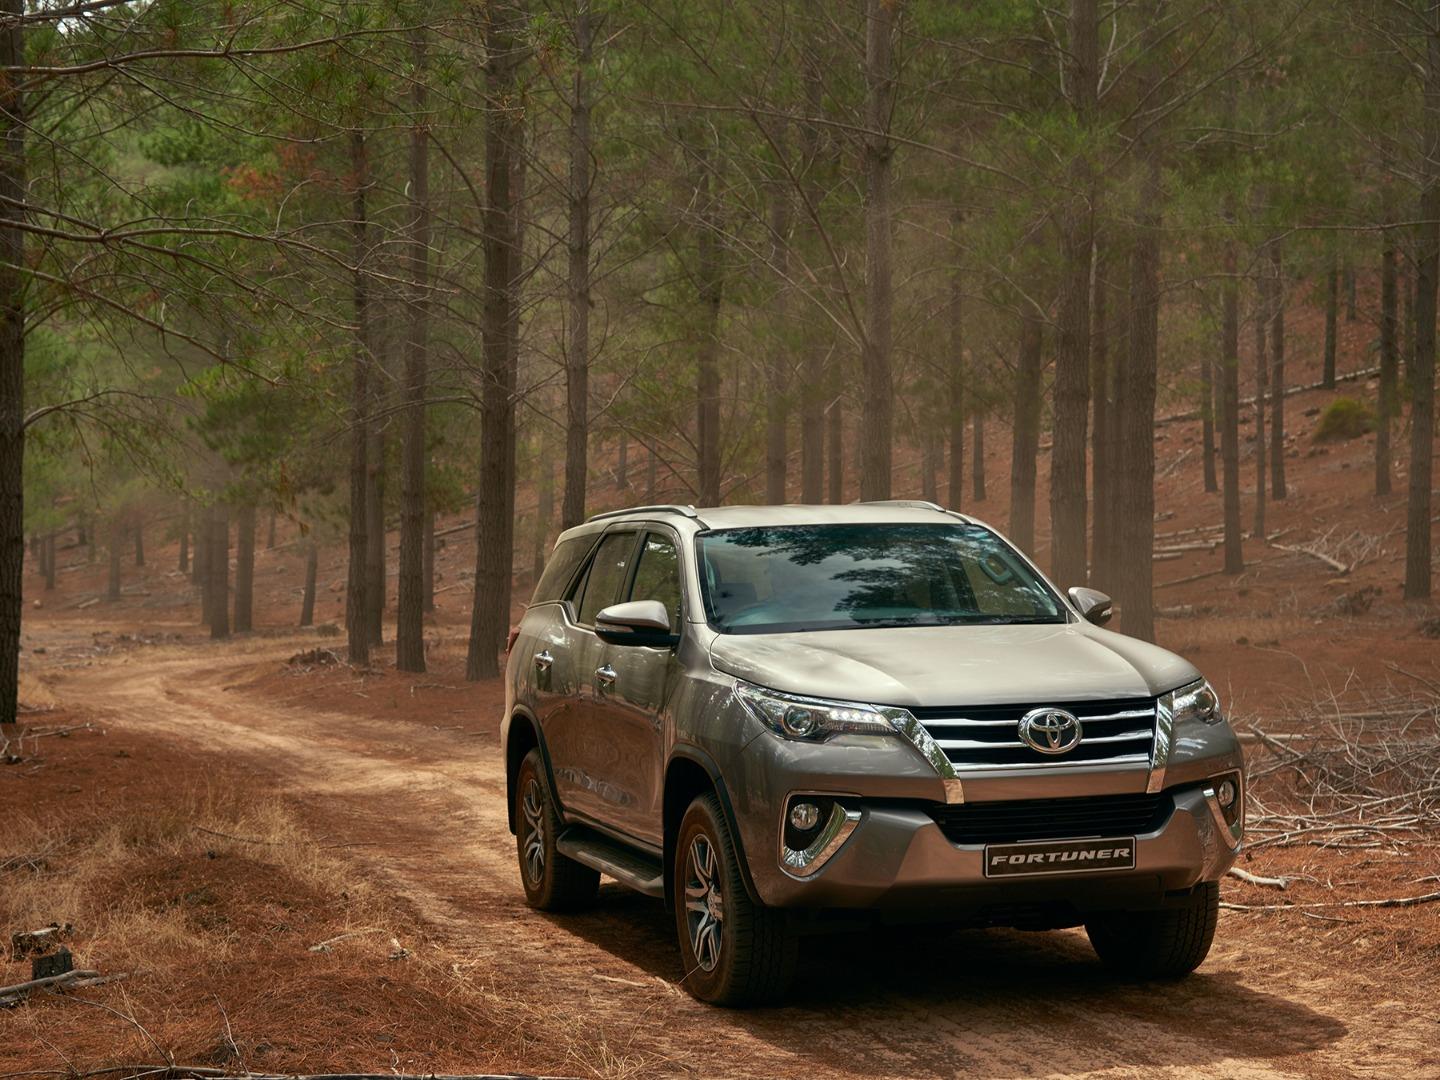 how much is my toyota fortuner worth?